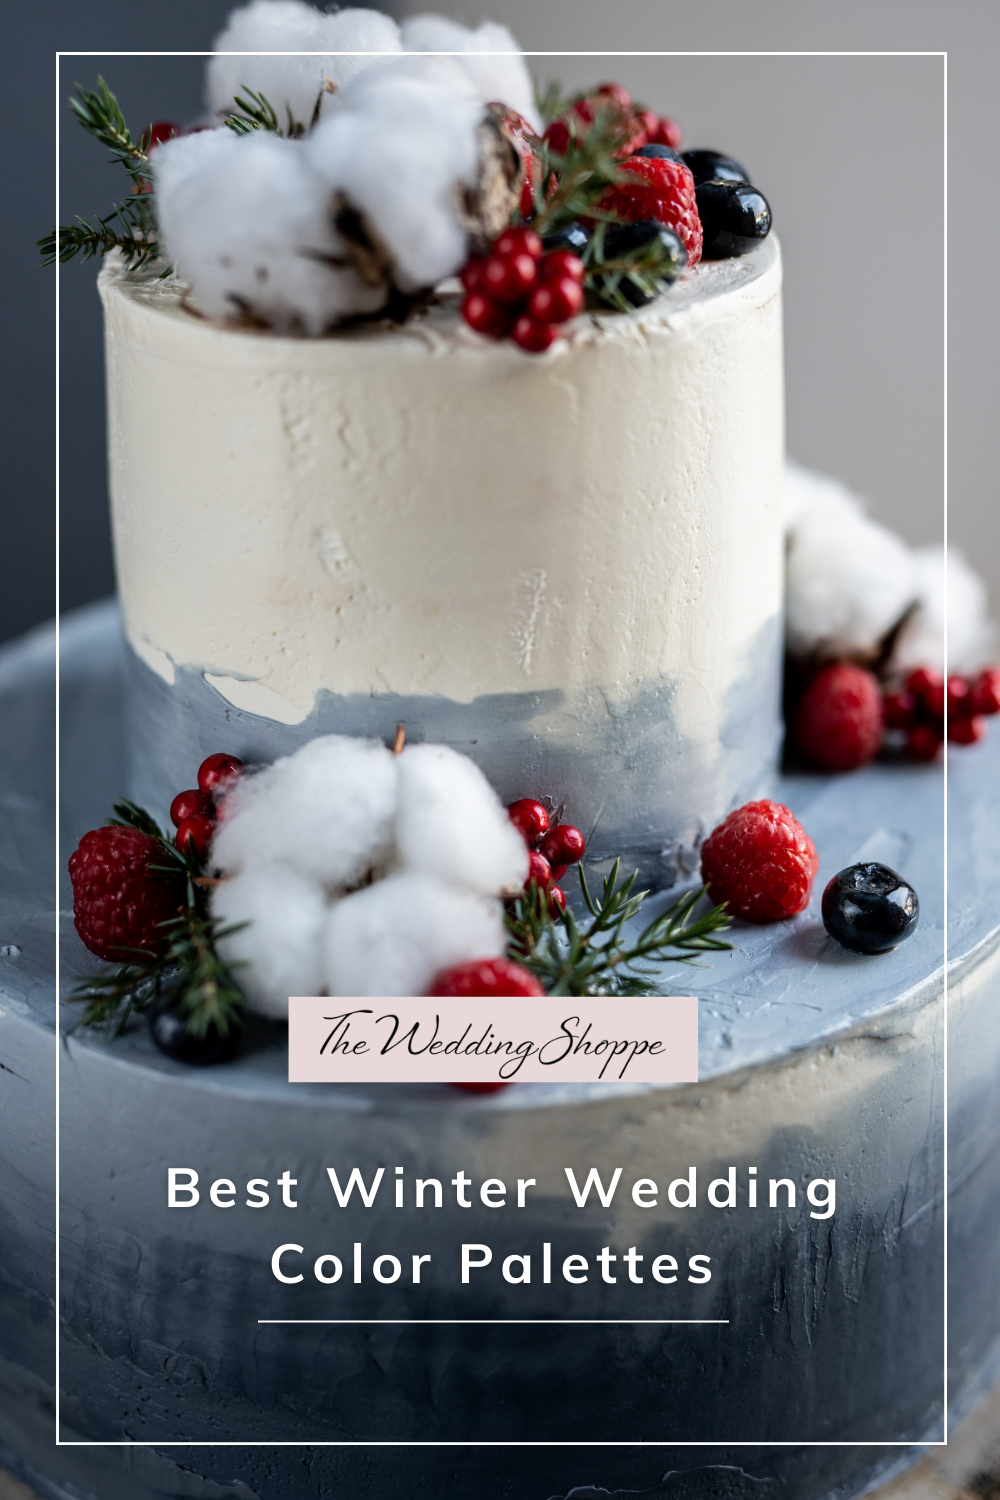 blog post graphic for "Best Winter Wedding Color Palettes"